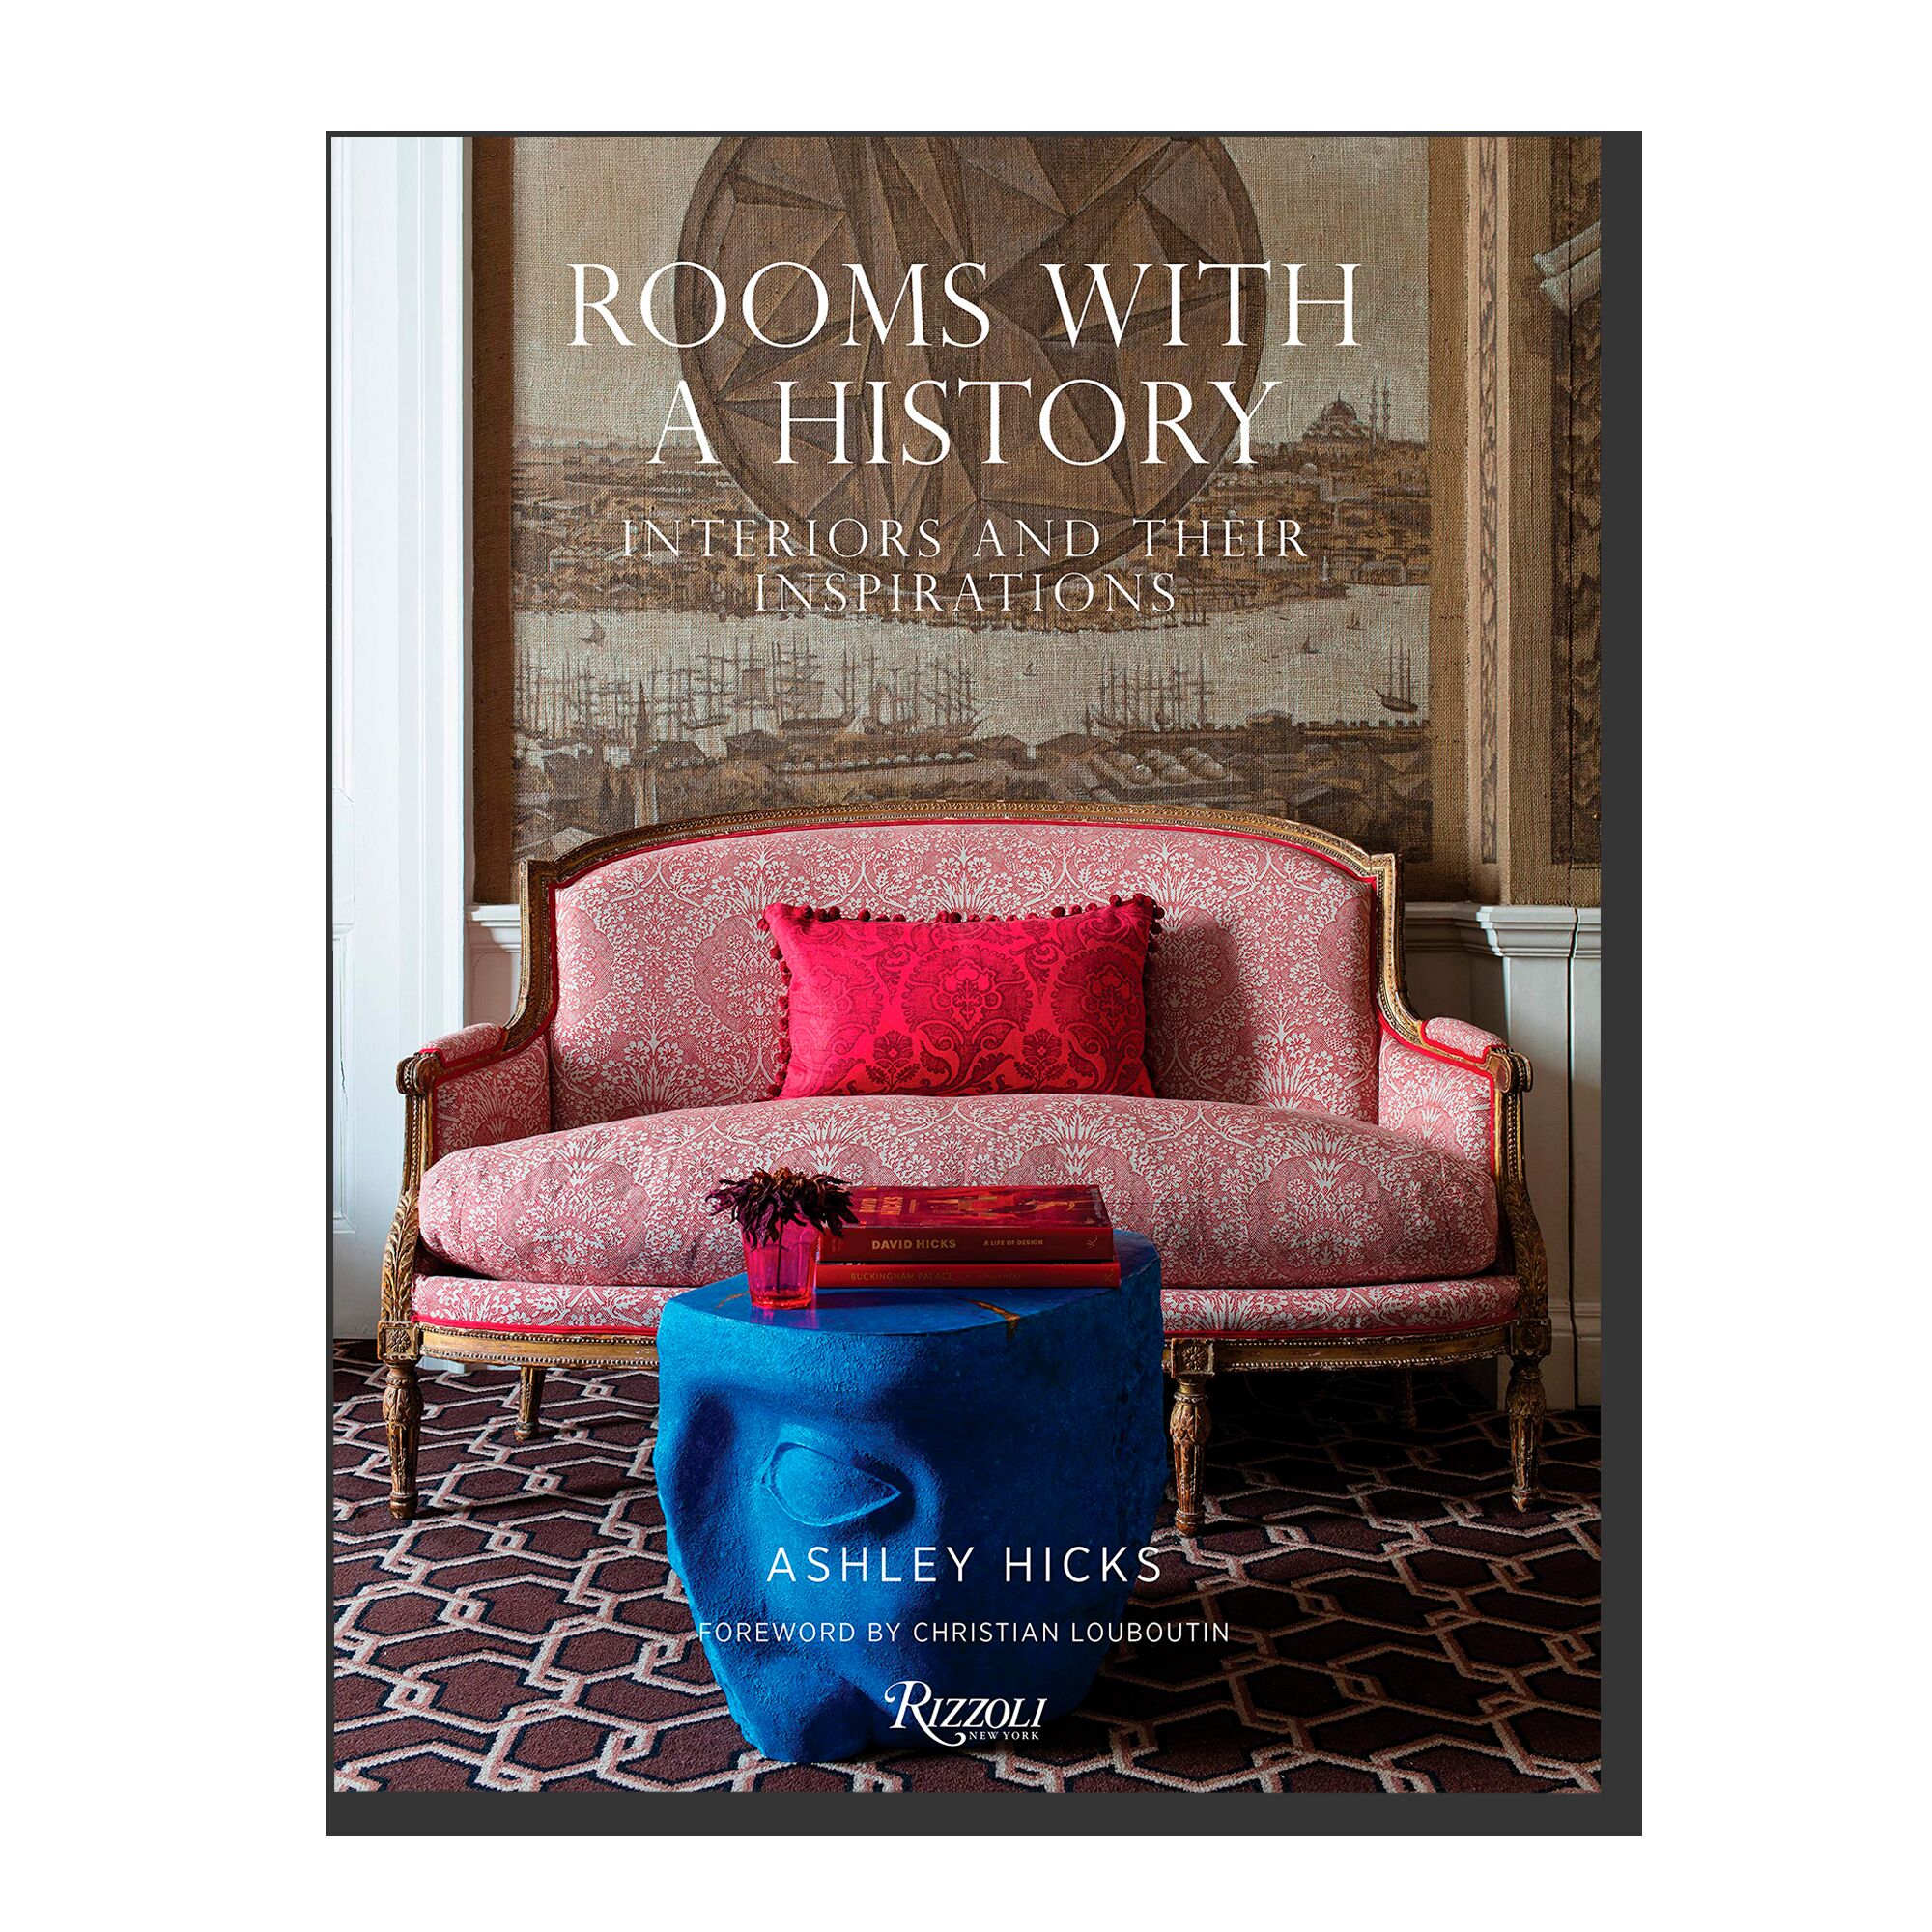 Rooms with History: Interiors and their Inspirations